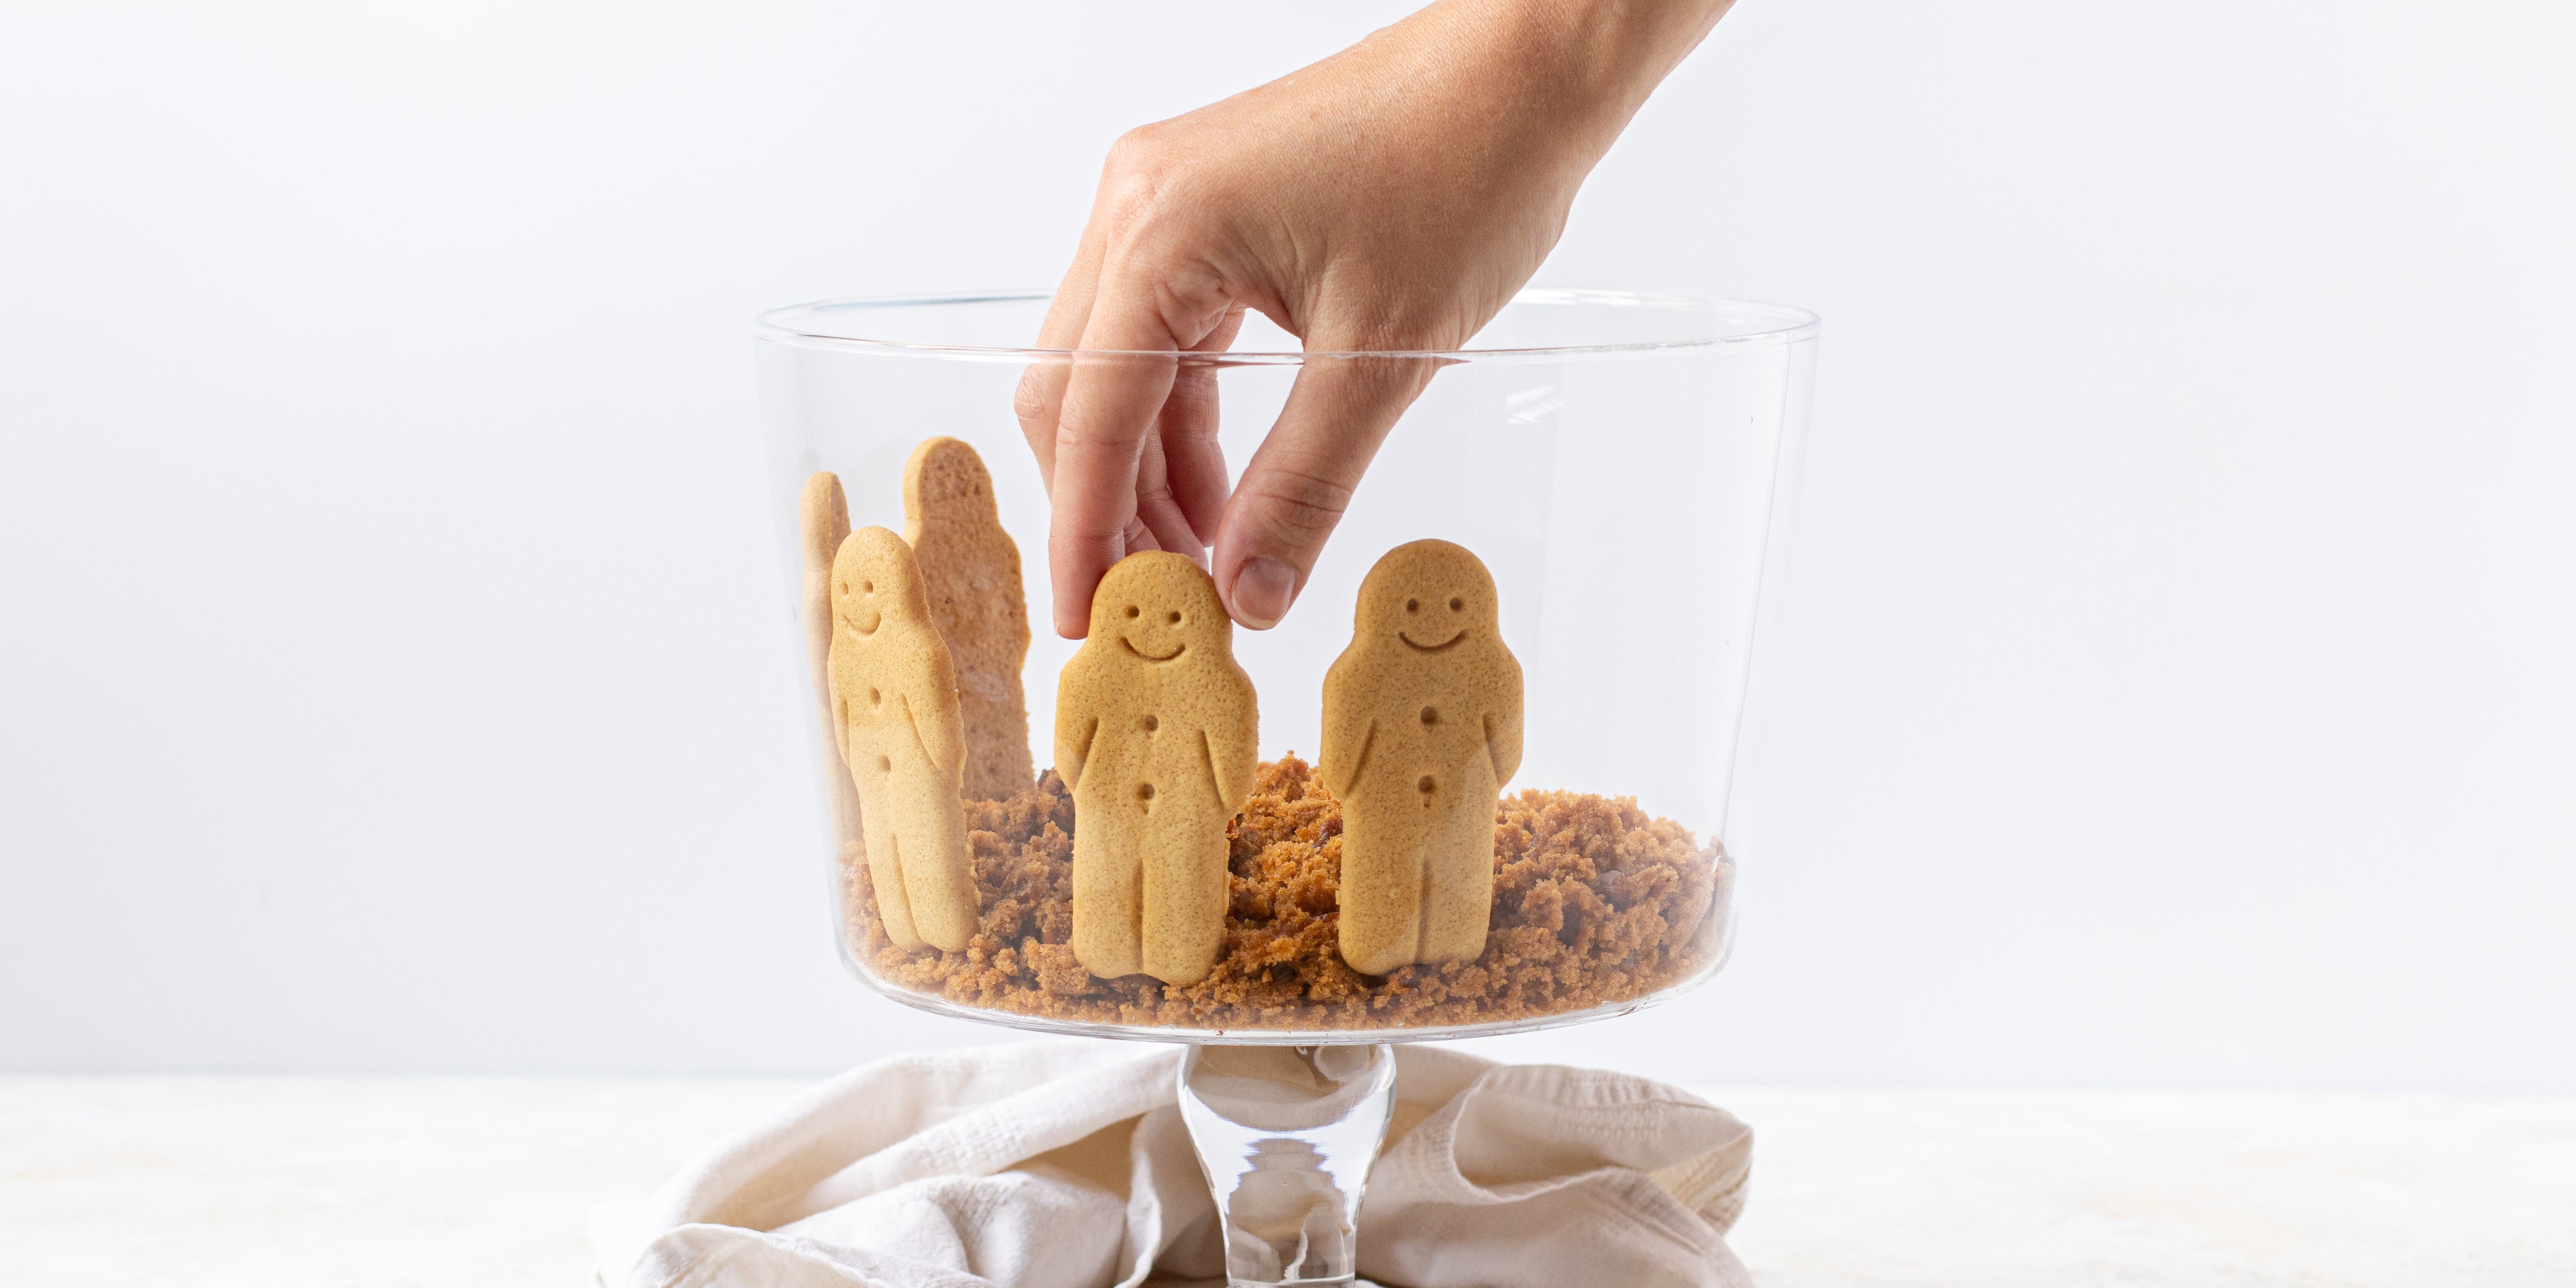 Hand decorating a Gingerbread Trifle with gingerbread men placed around the edge of the glass trifle bowl